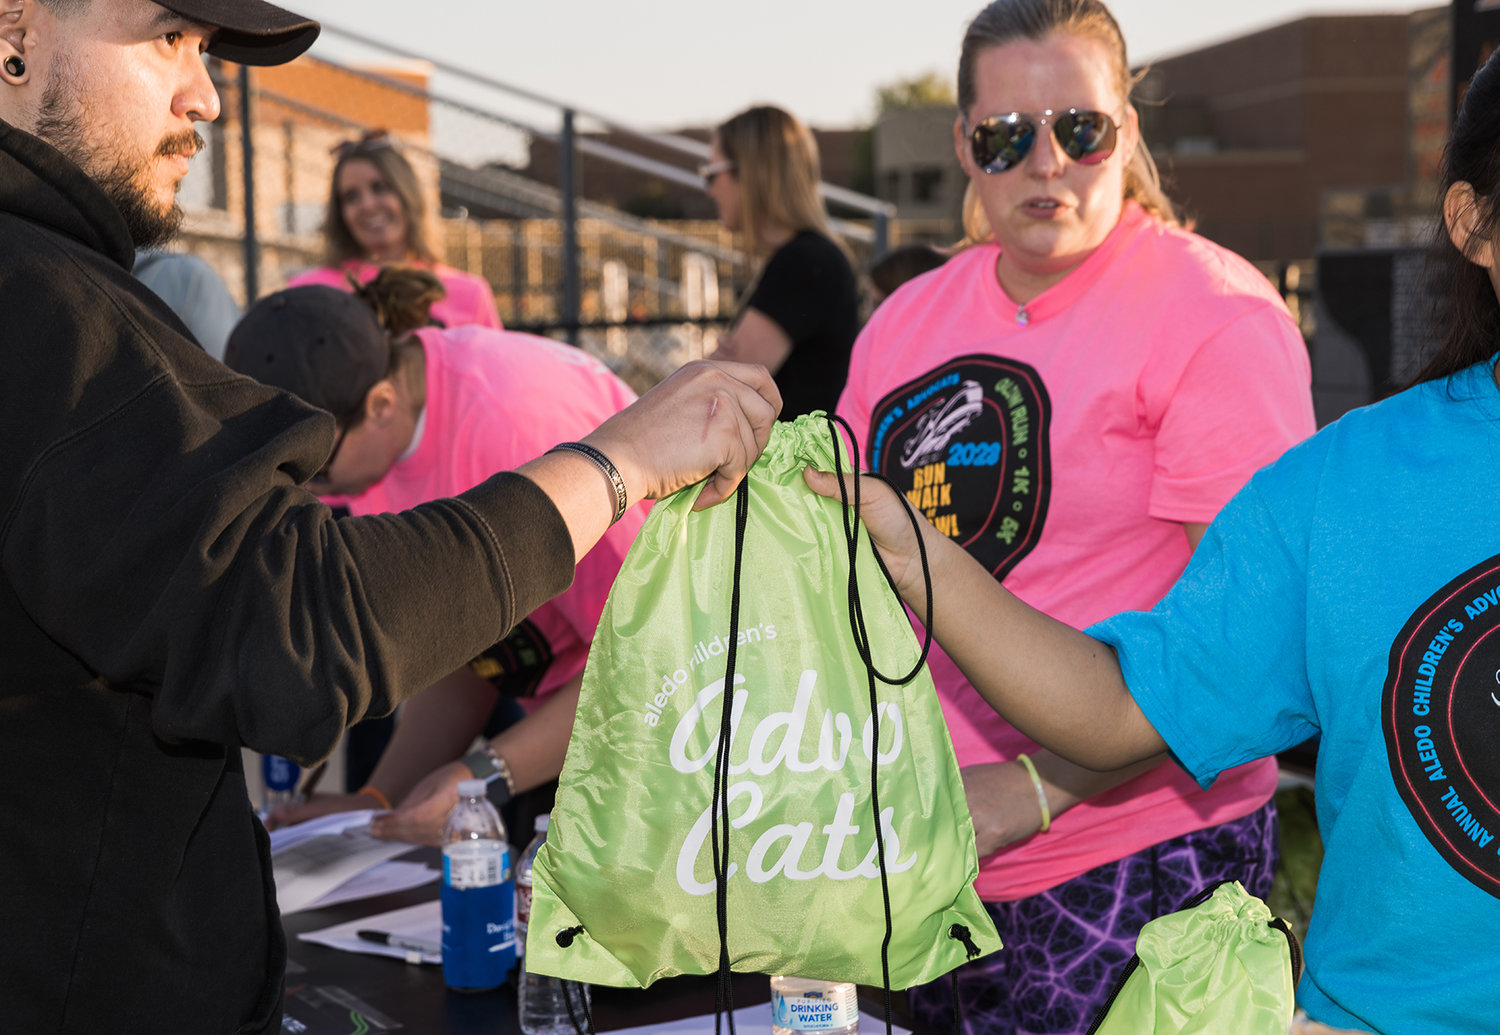 Runners receive backpacks at the registration table.